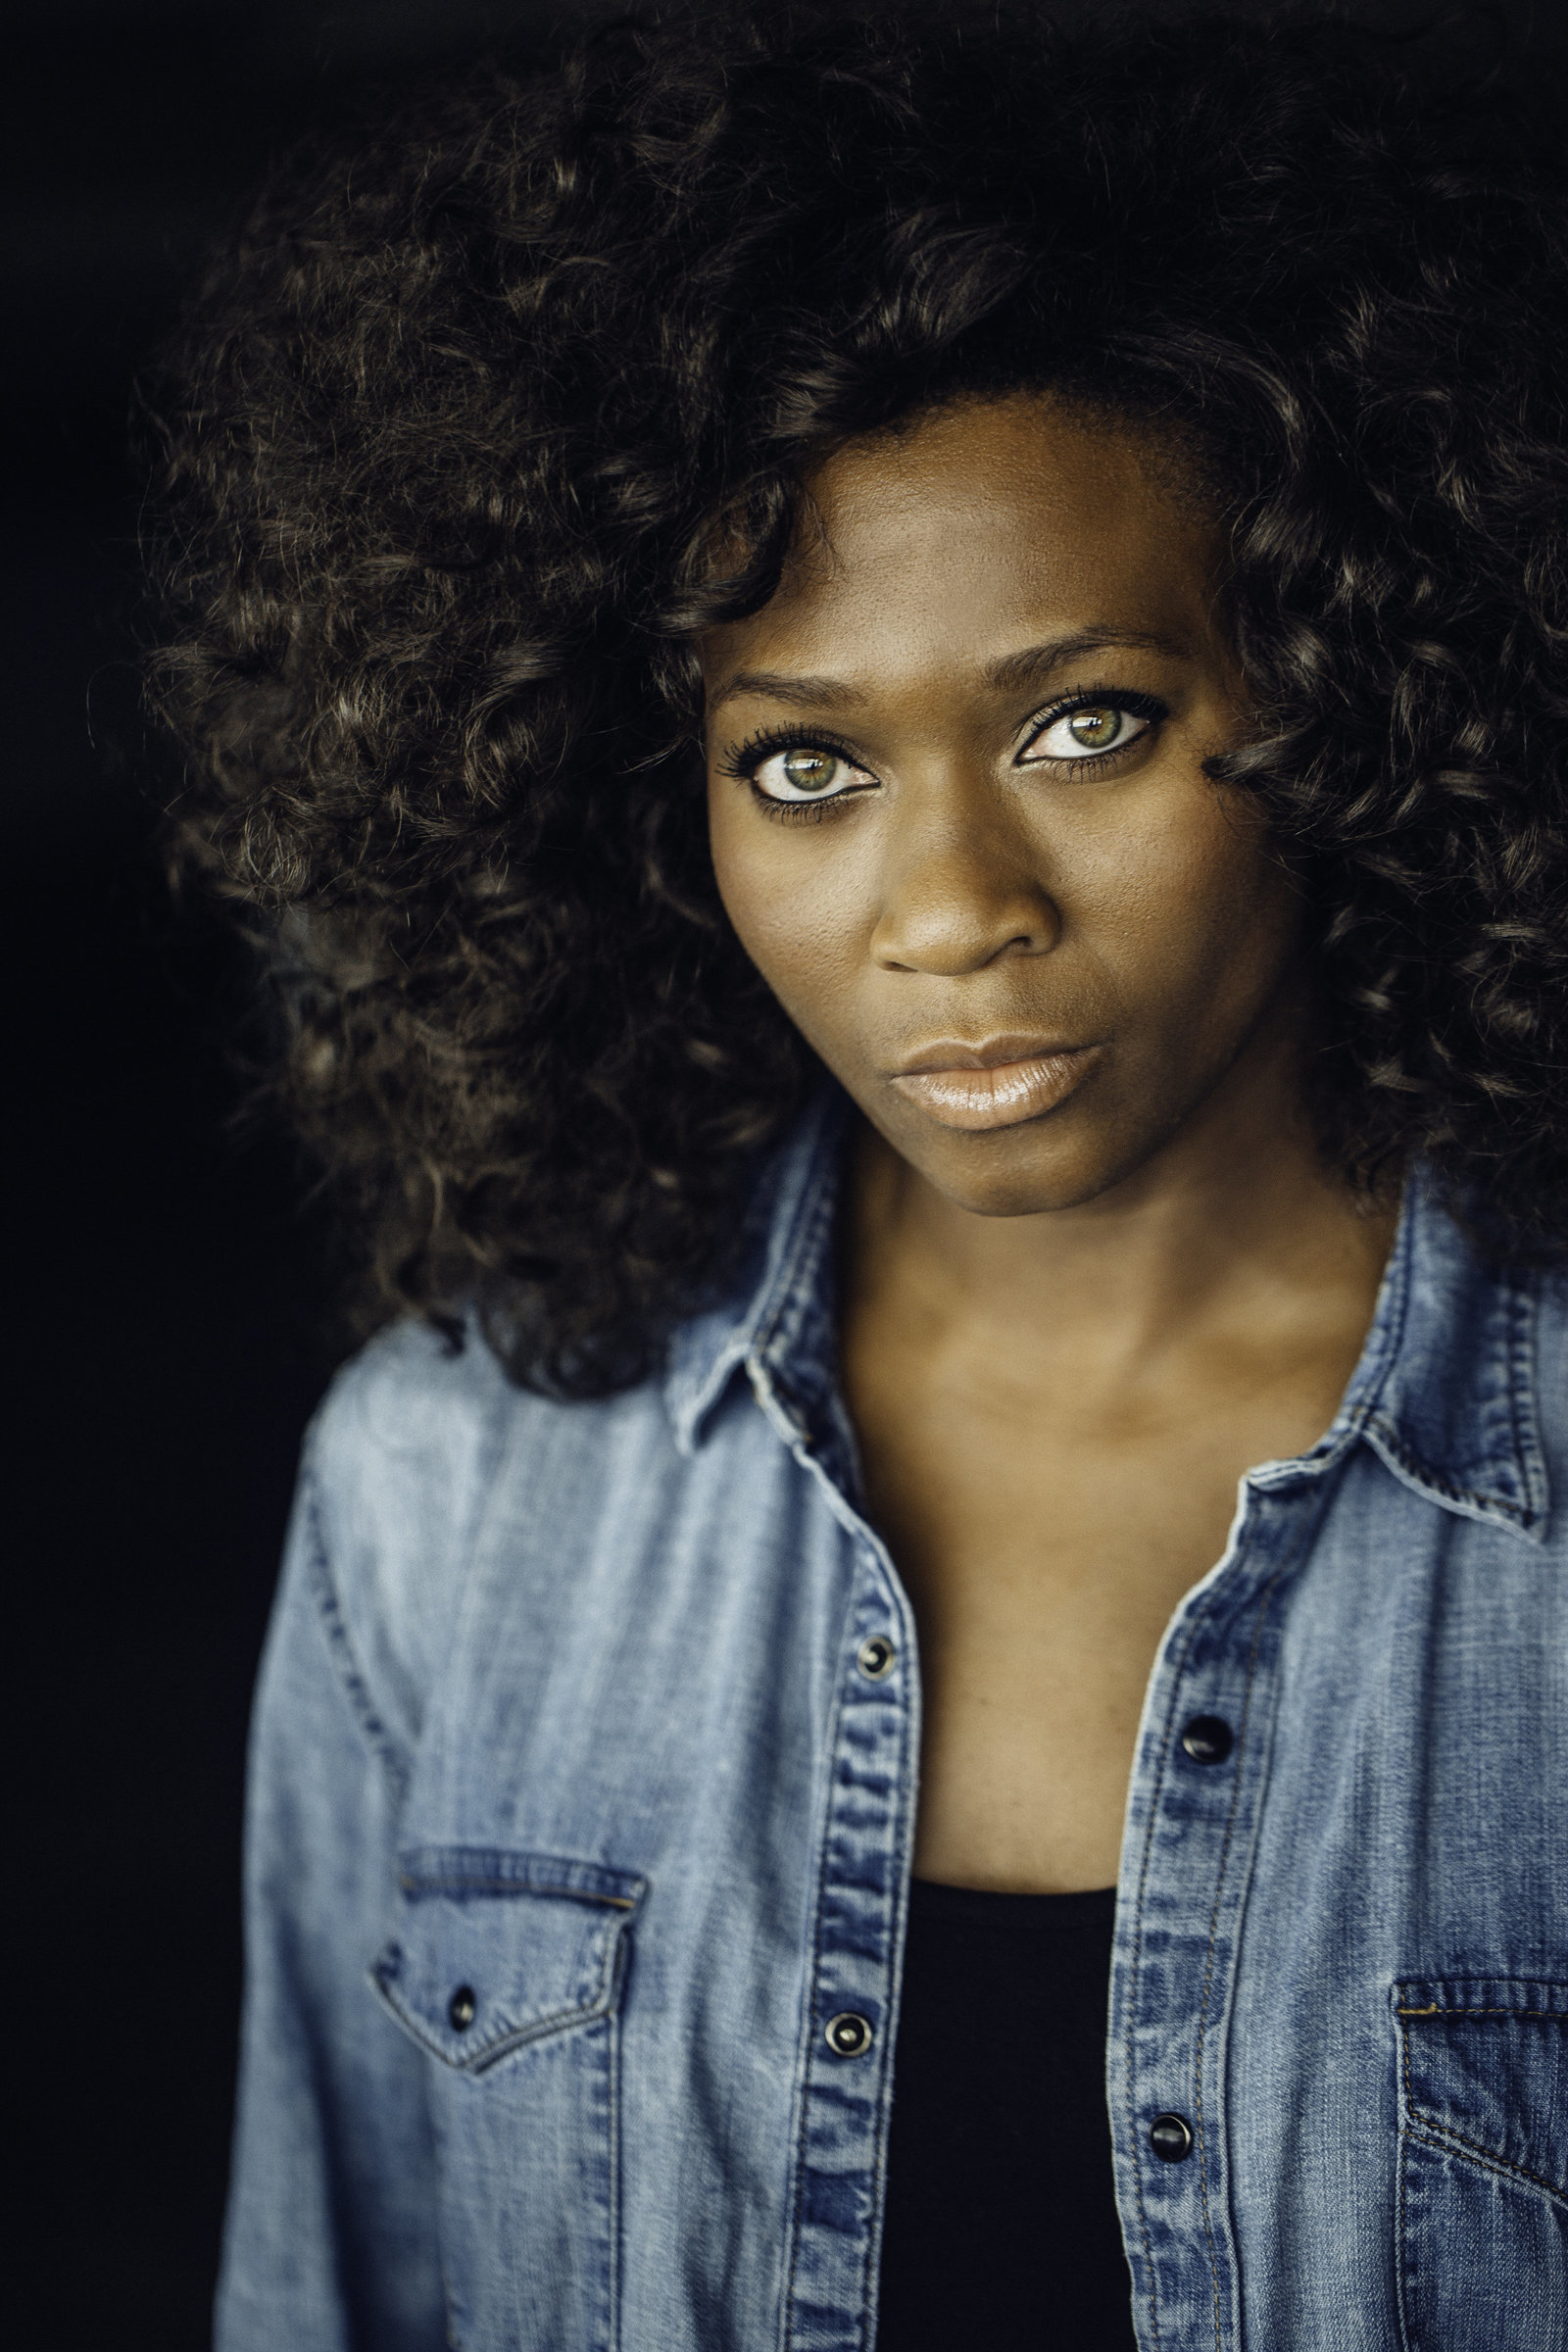 Headshot Photo Of Young Black Woman In Blue Denim Jacket And Black Tank Top